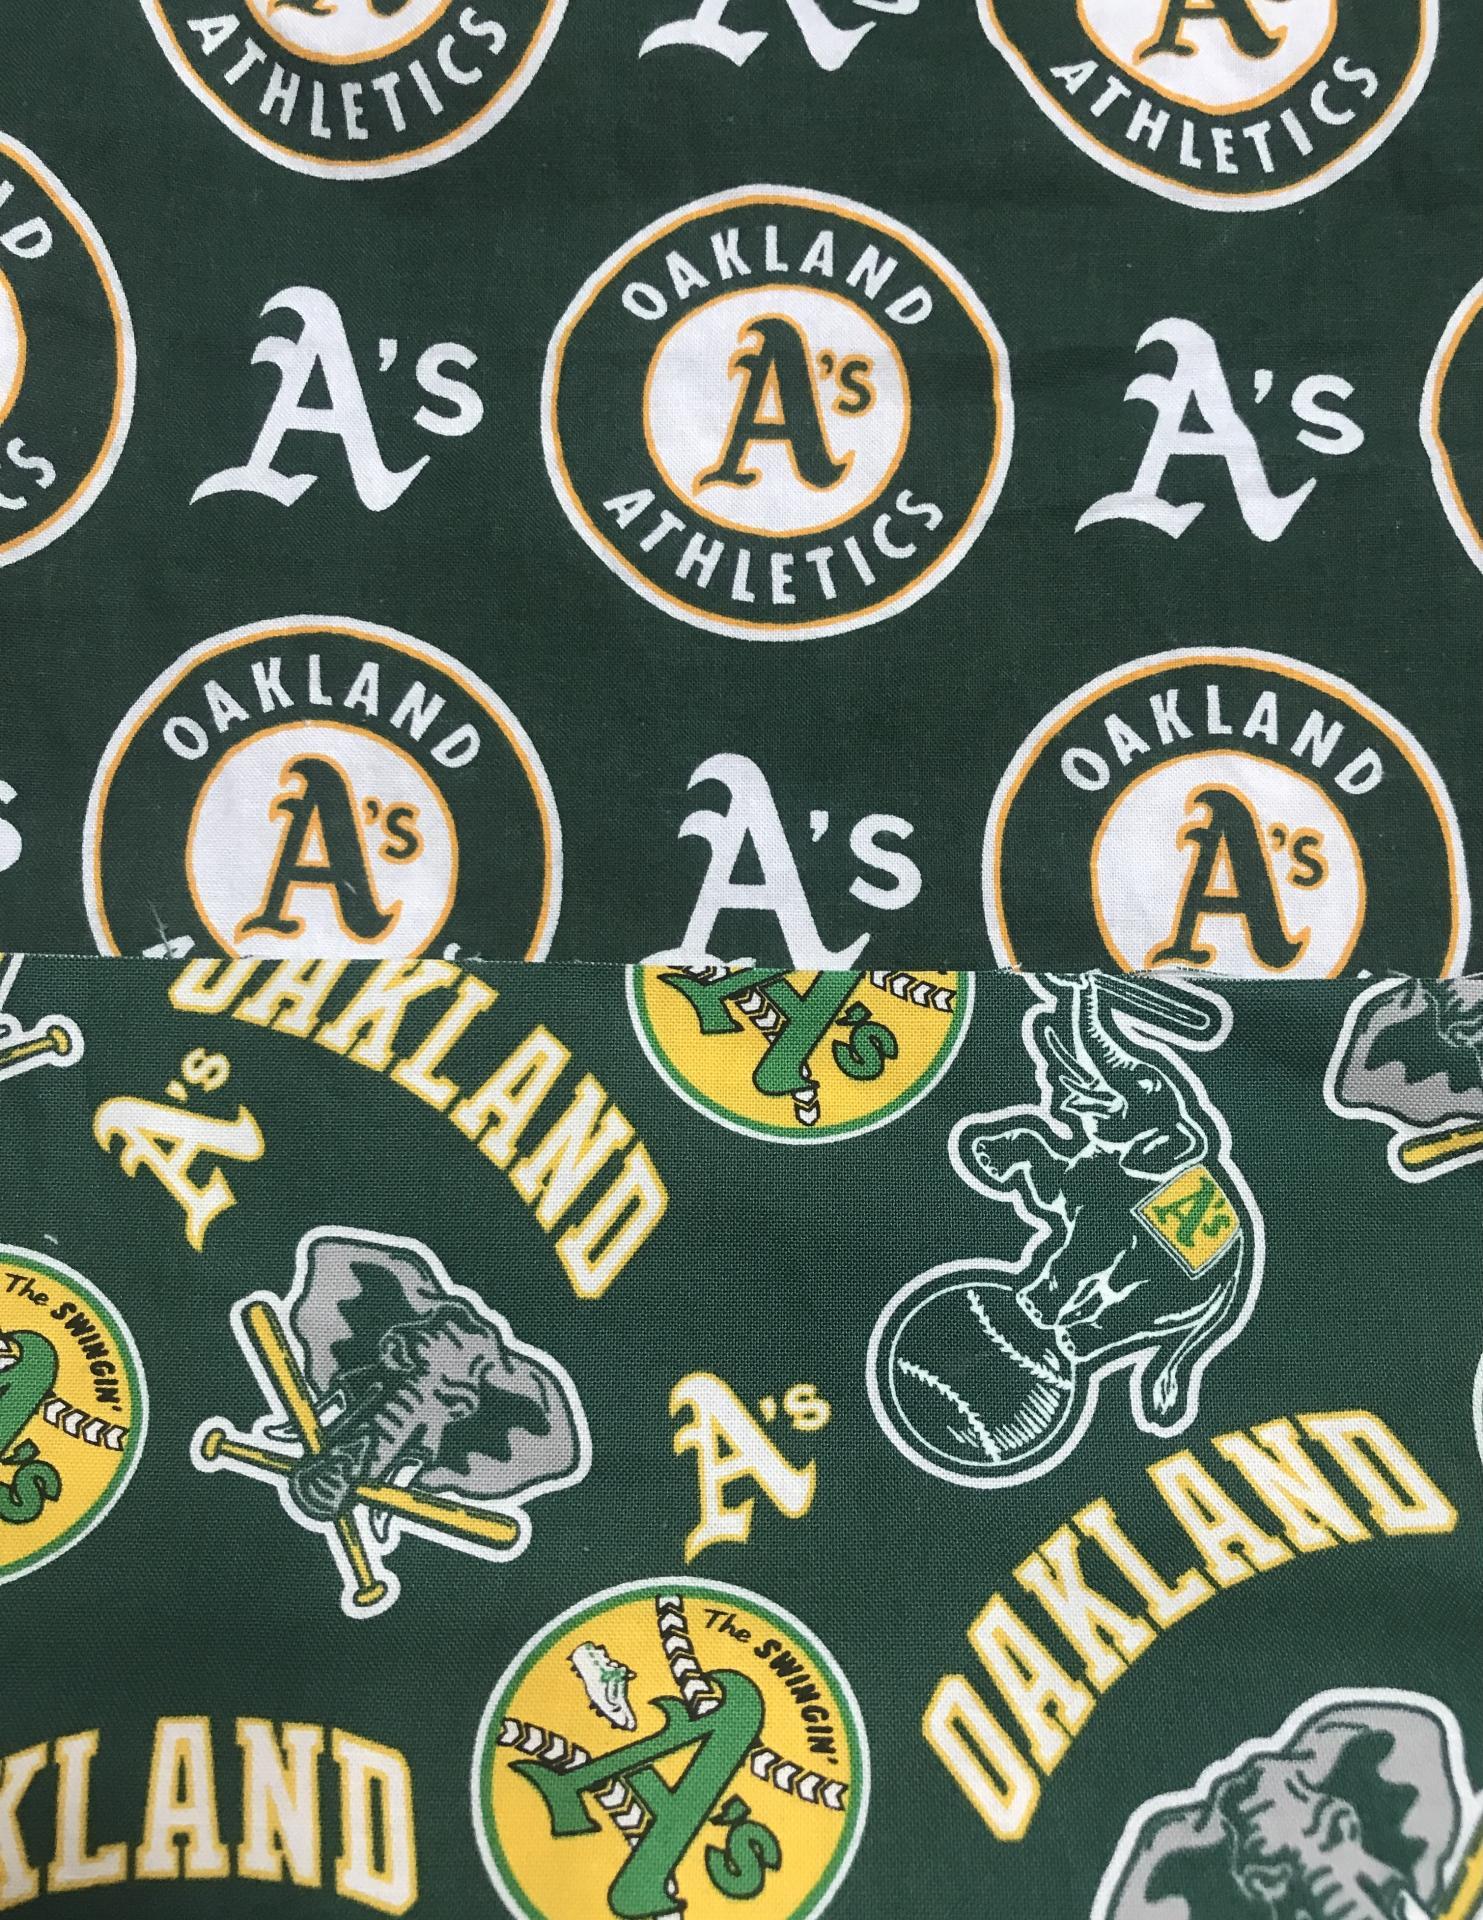 A's circle logo fabric on reverse of bucket hat